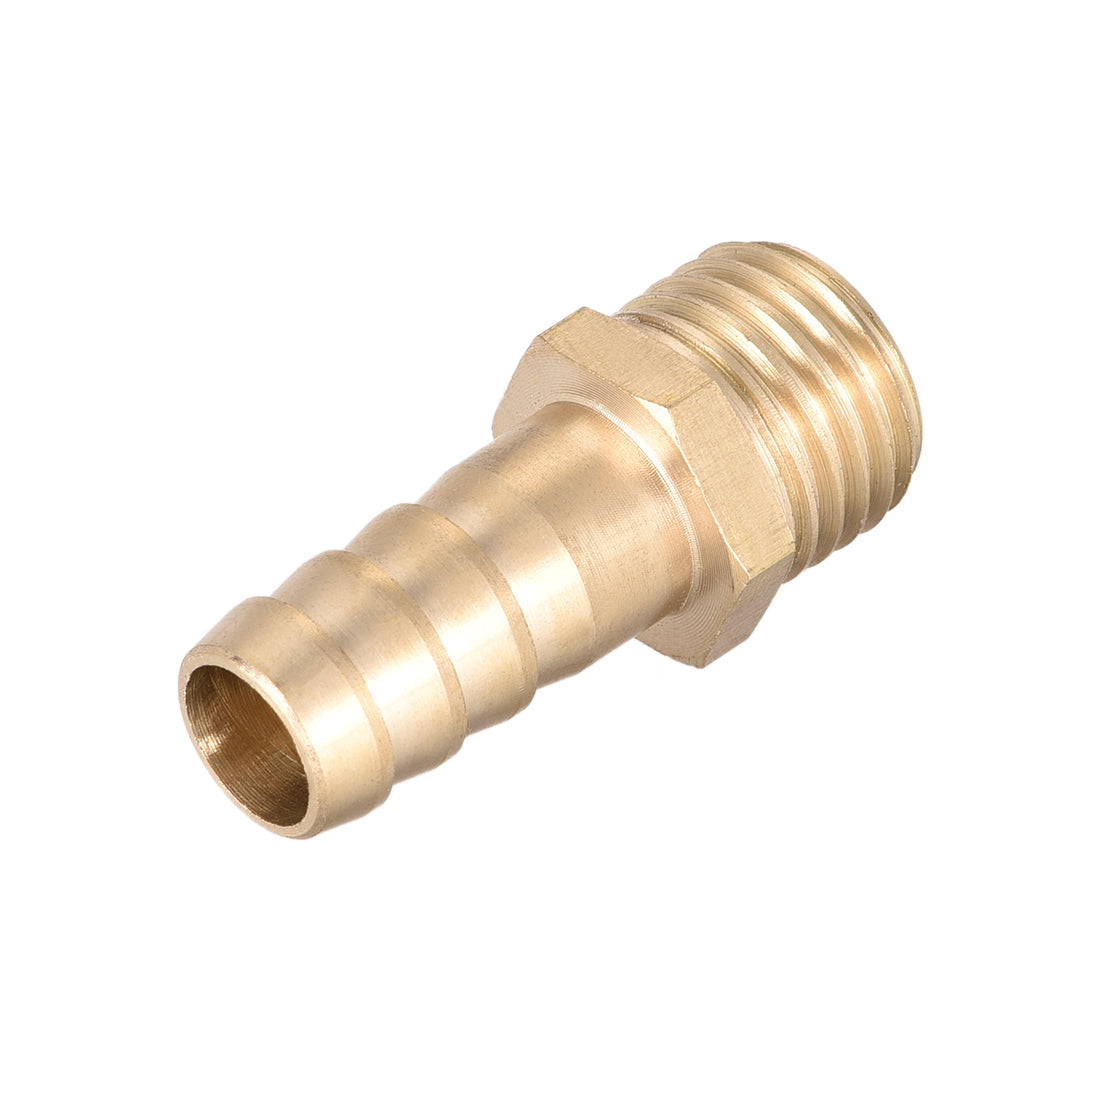 uxcell Uxcell Brass Fitting Connector Metric M14-1.5 Male to Barb Fit Hose ID 10mm 2pcs